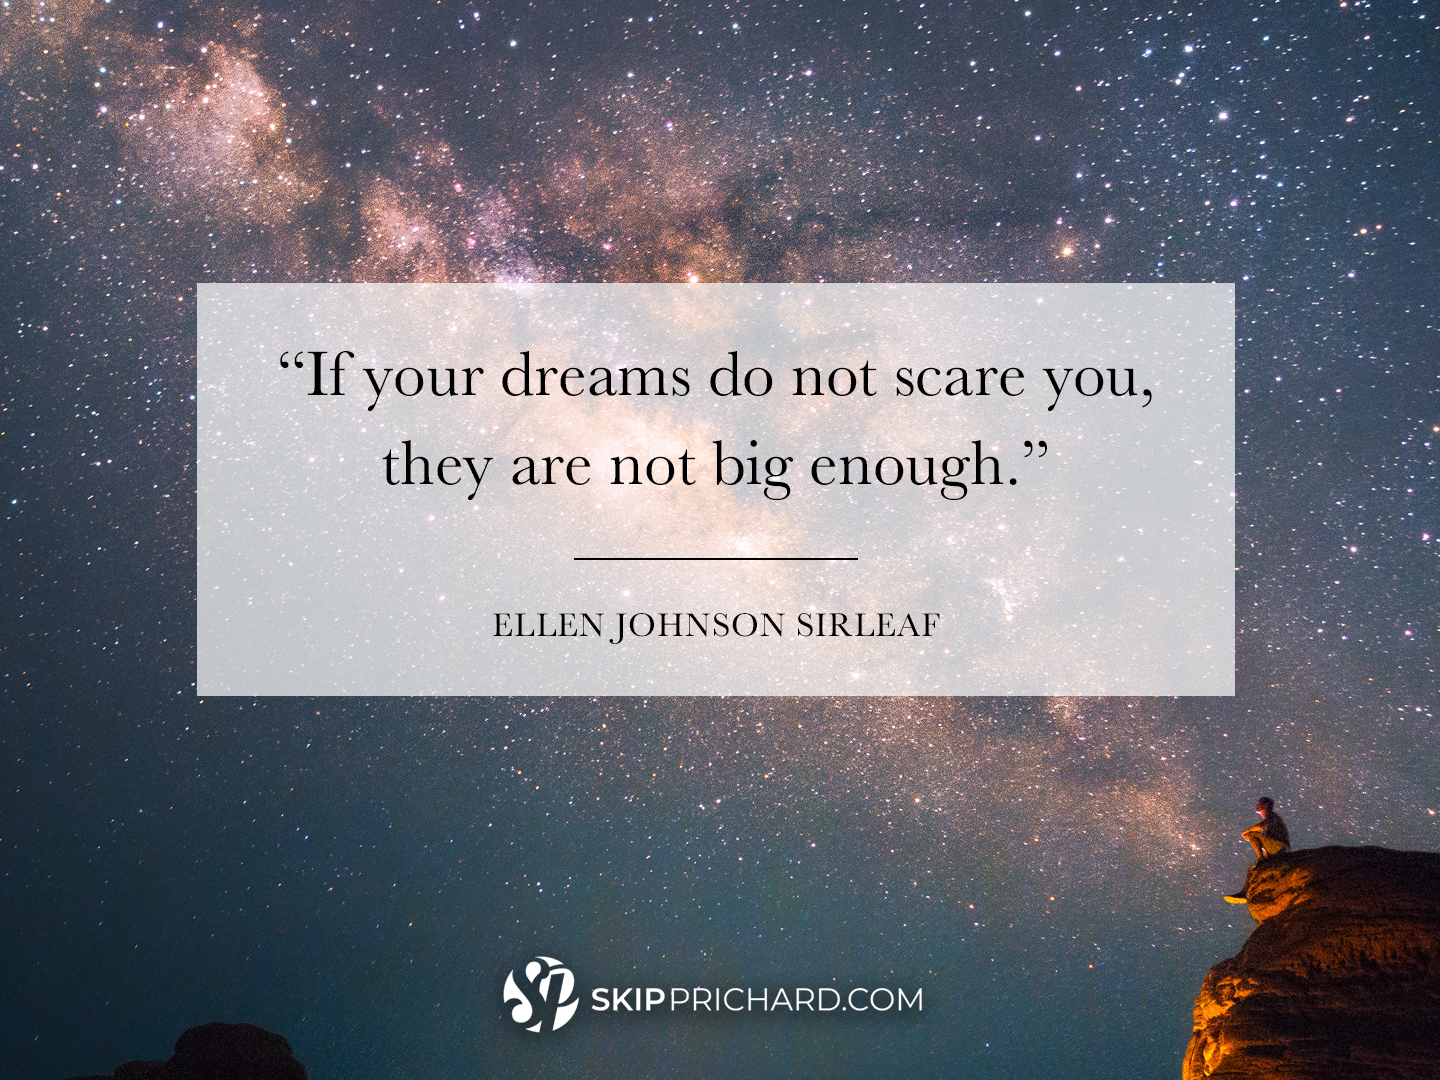 “If your dreams do not scare you, they are not big enough.”